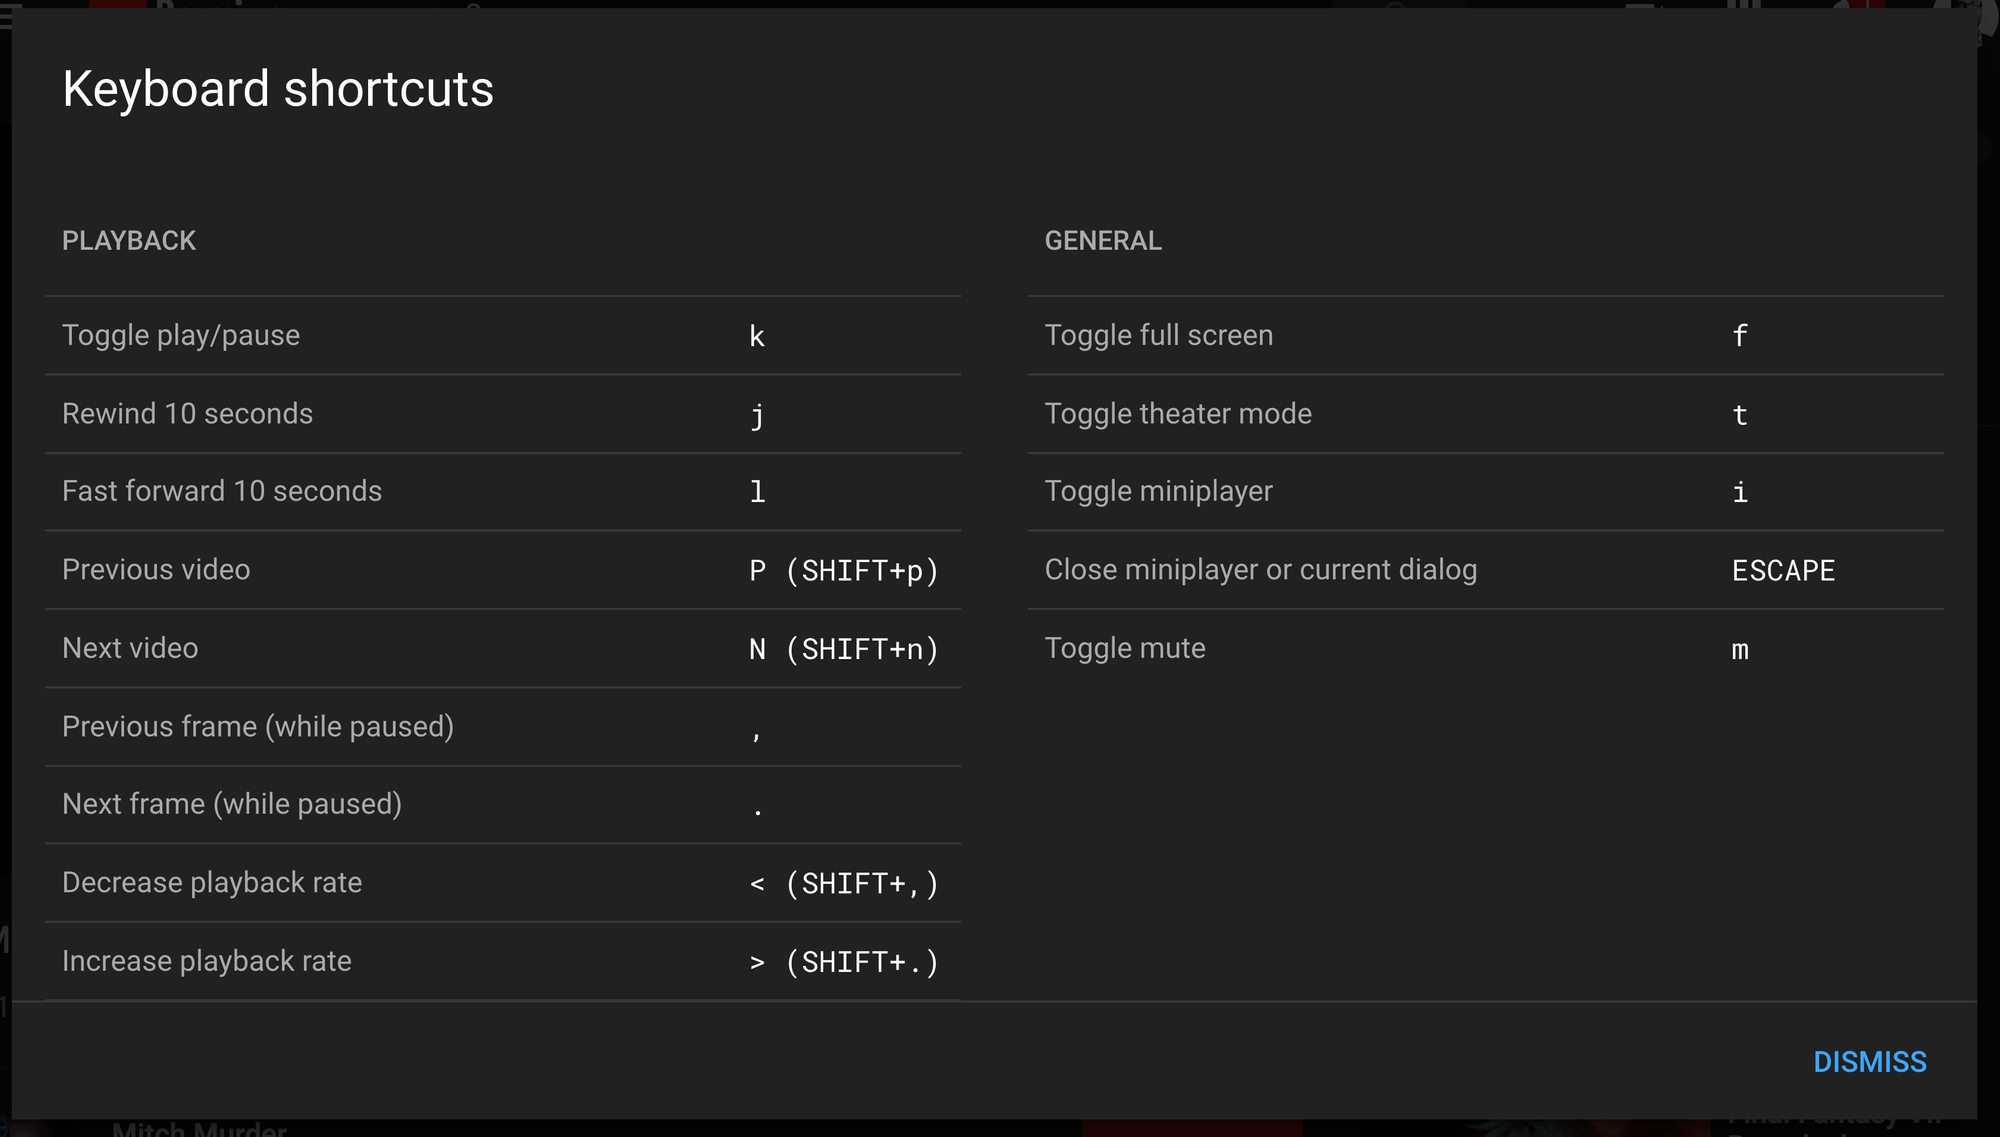 Learn YouTube Keyboard Shortcuts Like a Pro – Frame-by-Frame, Repeat